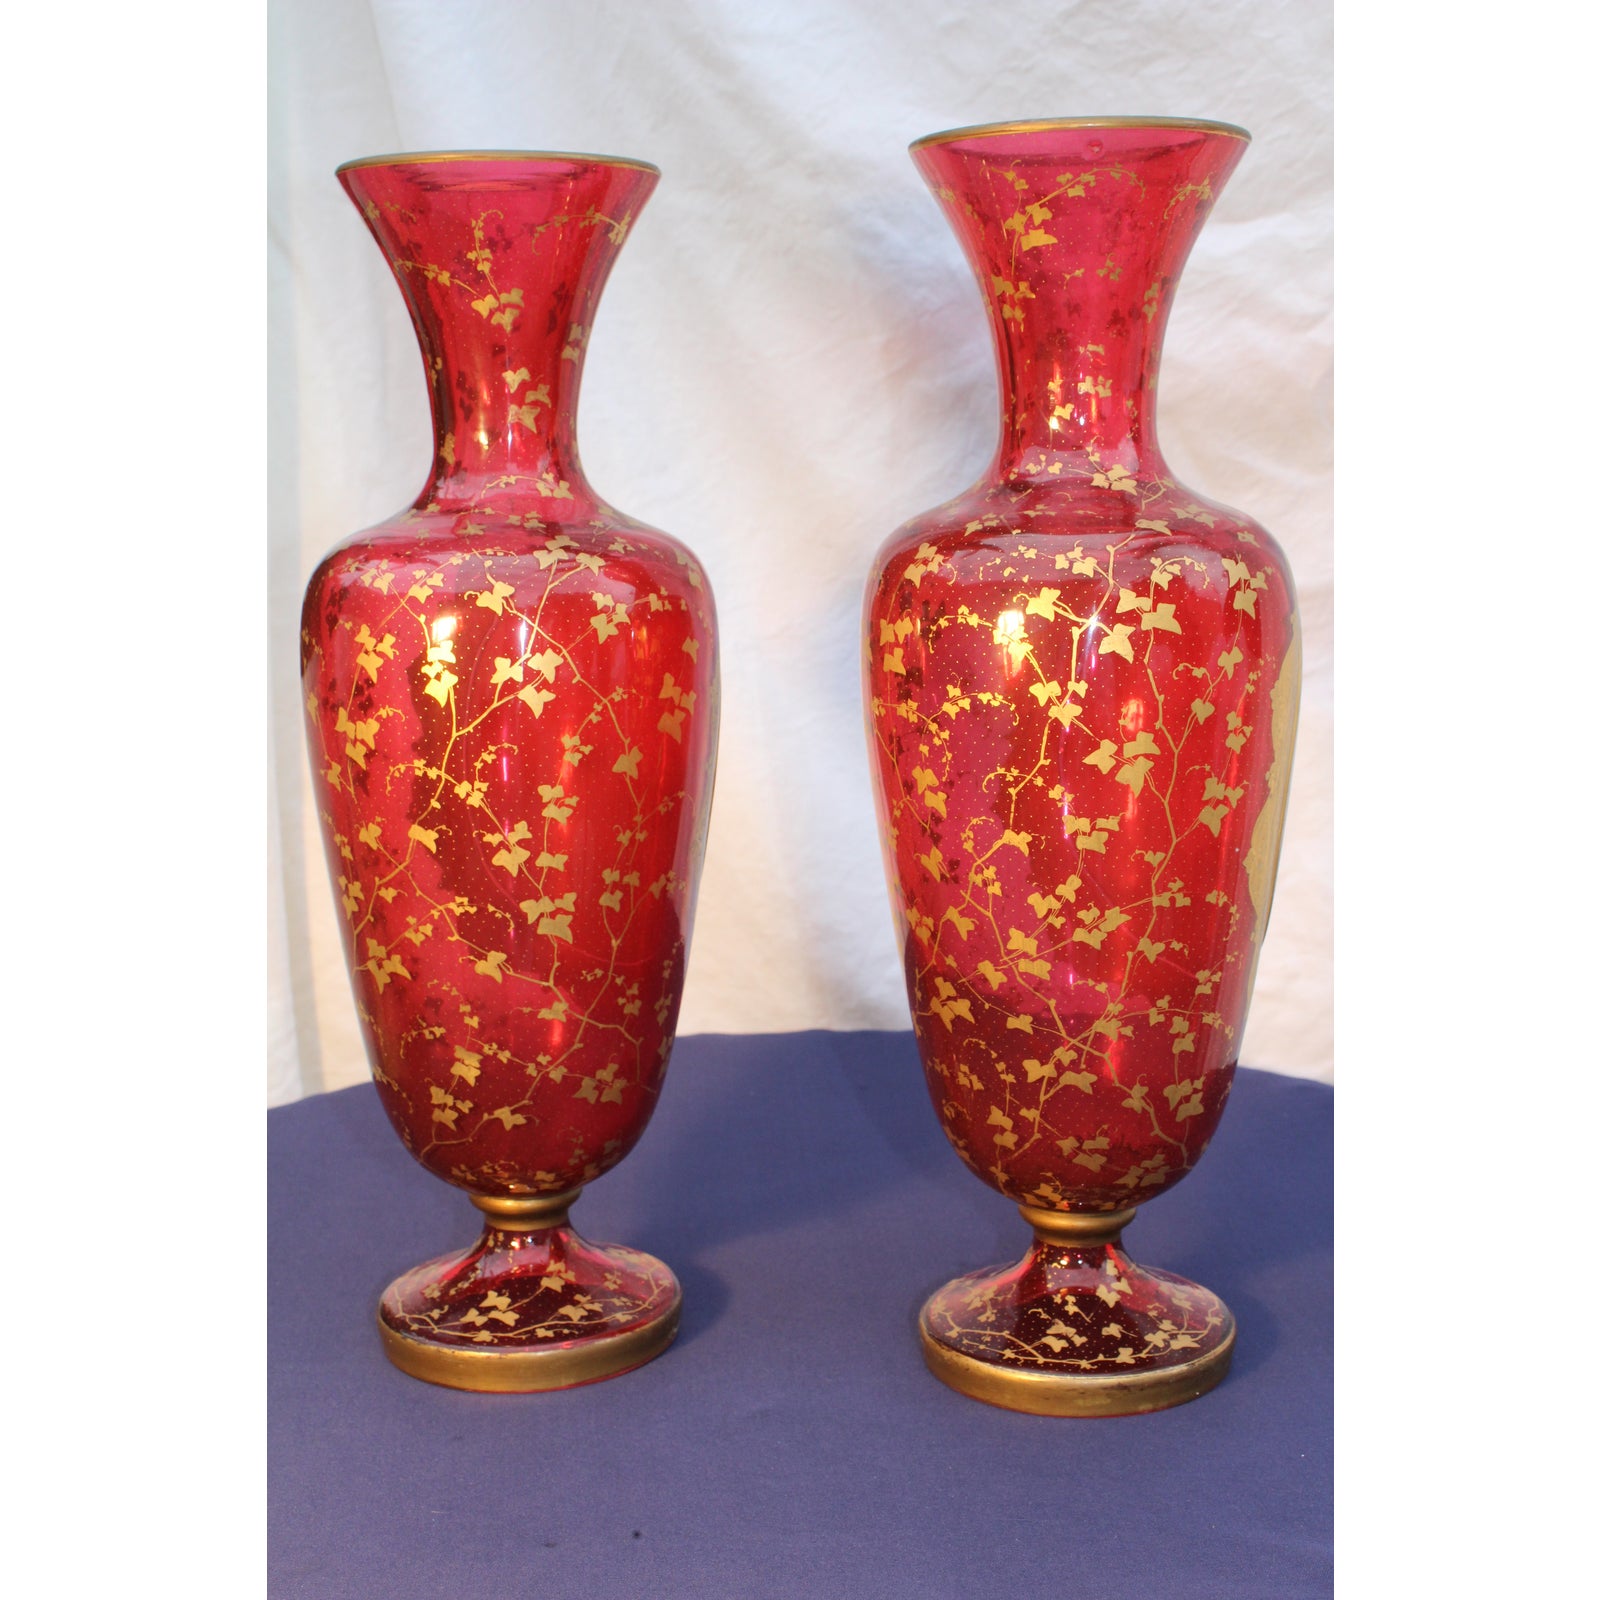 czechoslovakianbohemian-glass-vases-with-raised-painted-panels-a-pair-2889